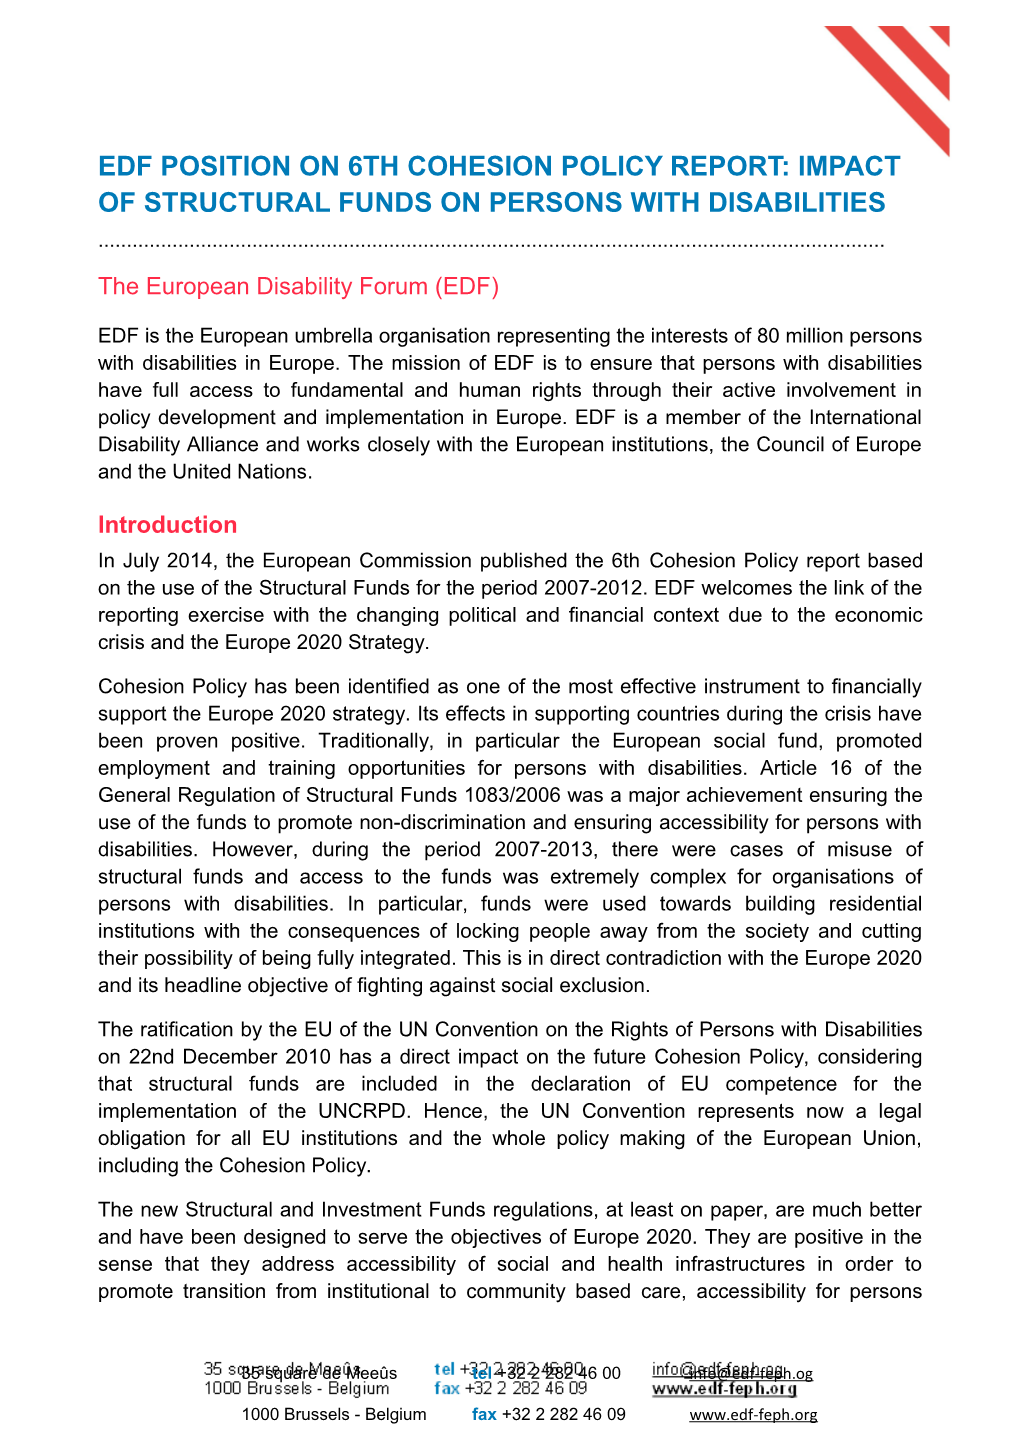 EDF Position on 6Th Cohesion Policy Report: Impact of Structural Funds on Persons With